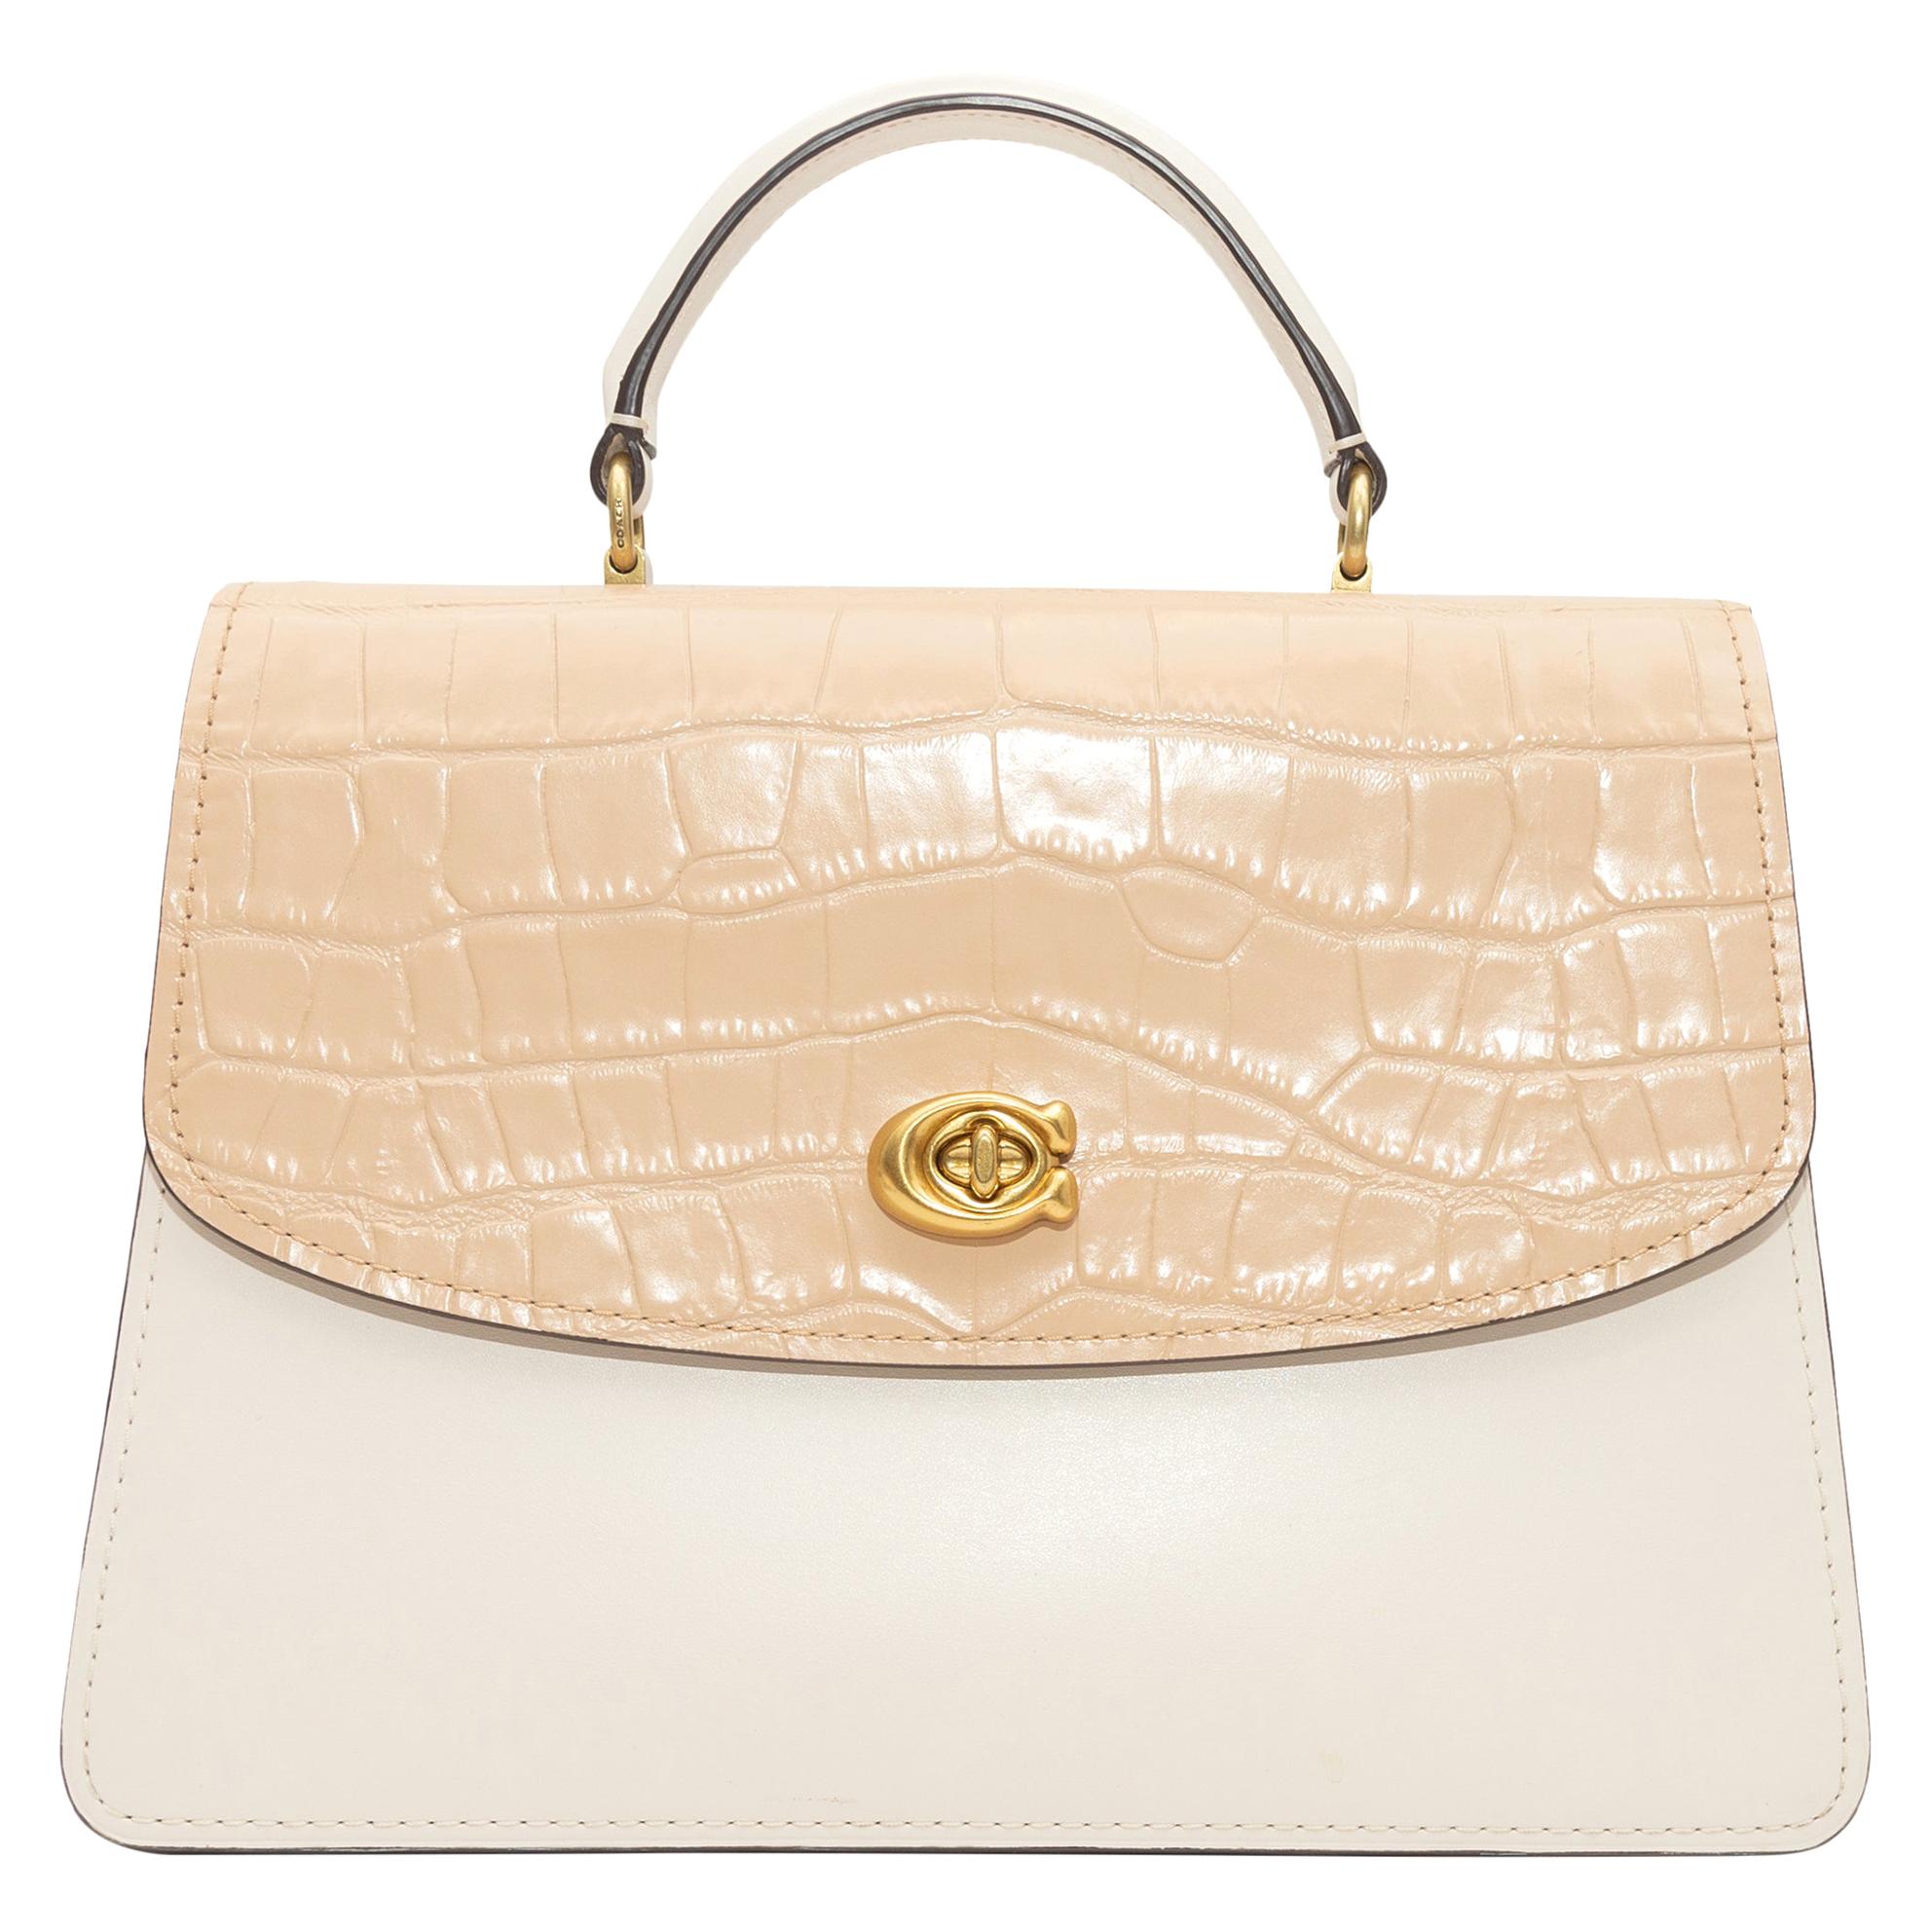 Coach White & Cream Leather & Suede Flap Bag